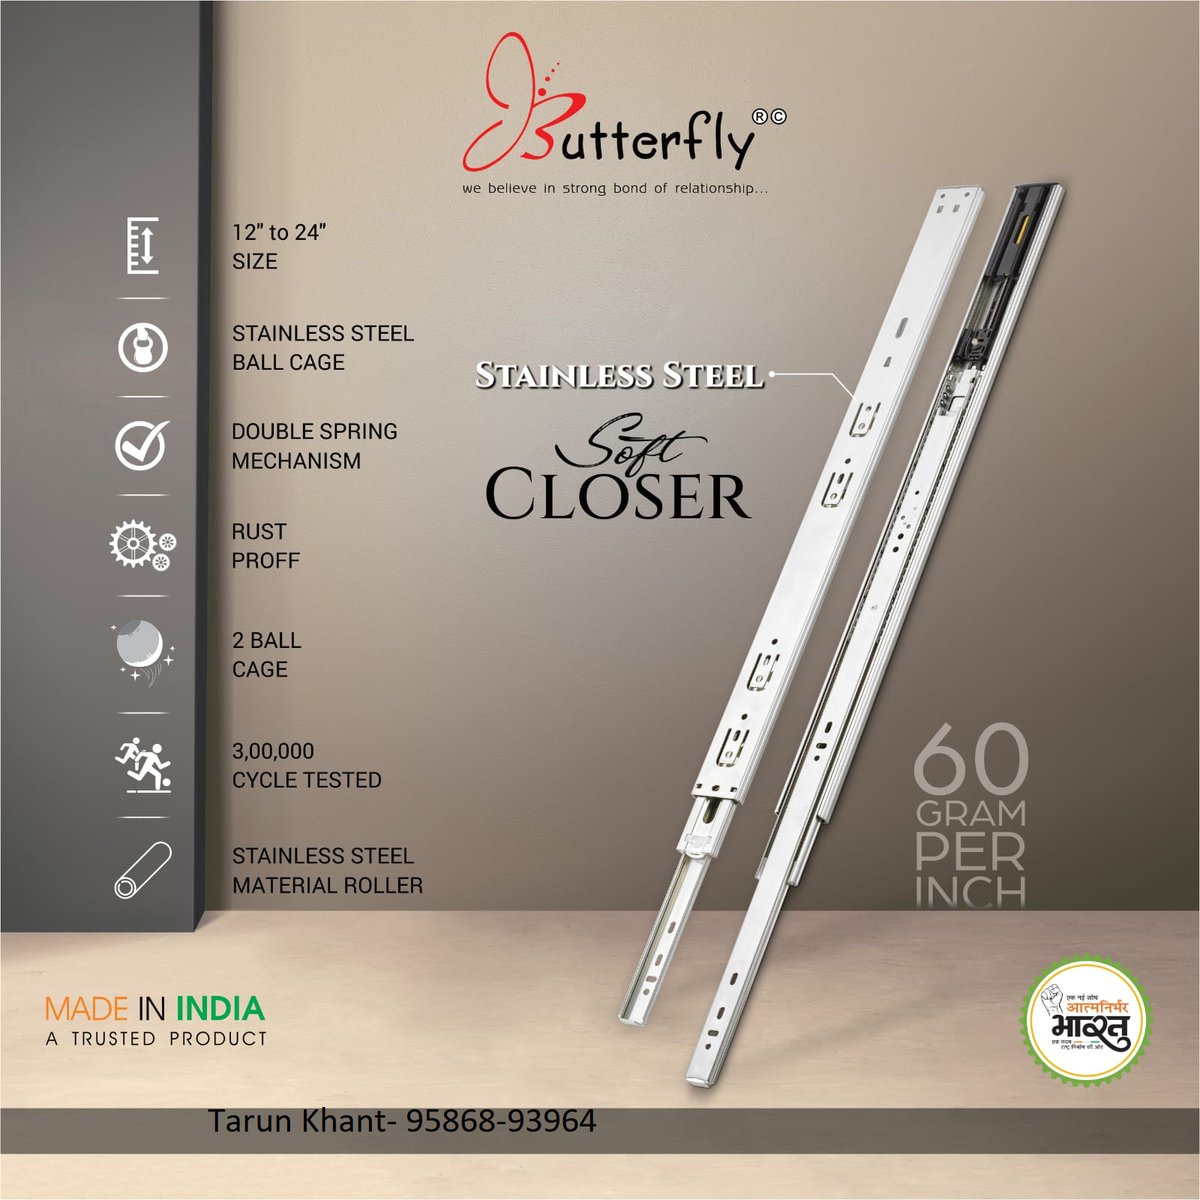 Get the ultimate convenience & reliability with the #Butterfly SS Soft Close #TelescopicChannel.
#butterflydrawerslide #StainlessSteelDrawerSlide #DrawerSlides #TelescopicSlides #StainlessSteelDrawerRunners #Rajkot #ButterflyStainlessSteelSlides #KitchenFittings #KitchenHardware